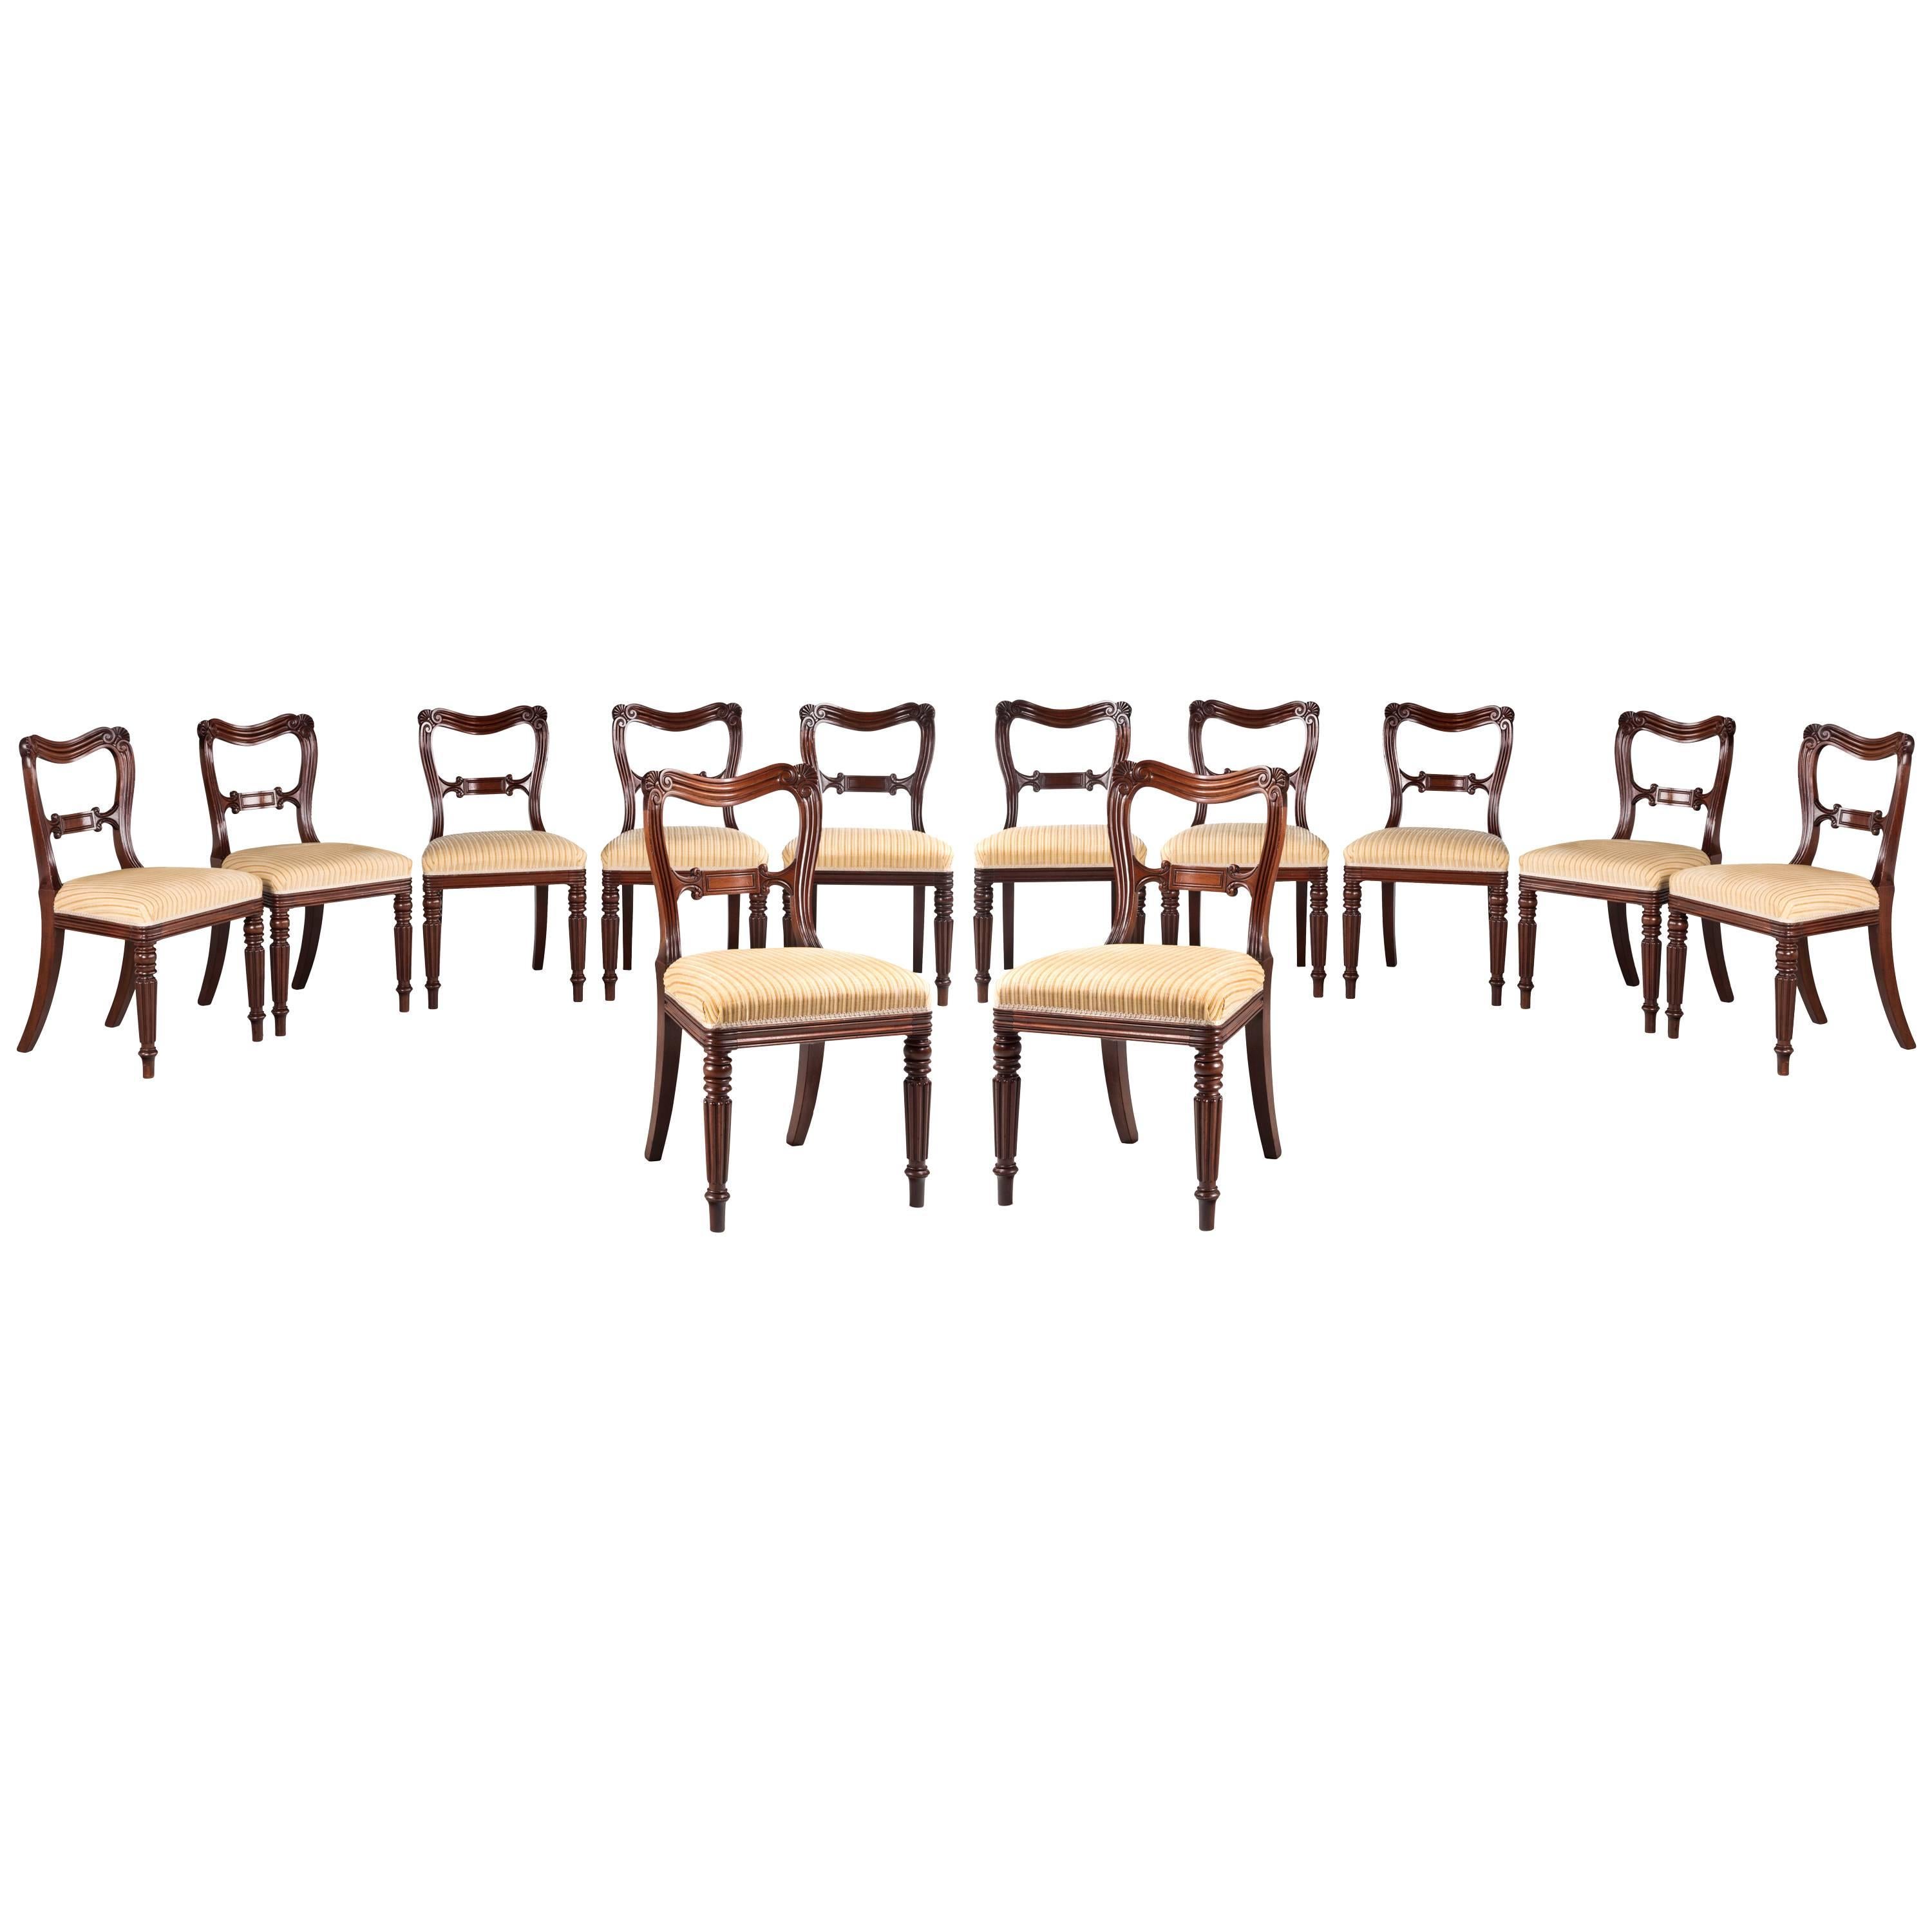 Set of 12 Late Regency Period Mahogany Chairs